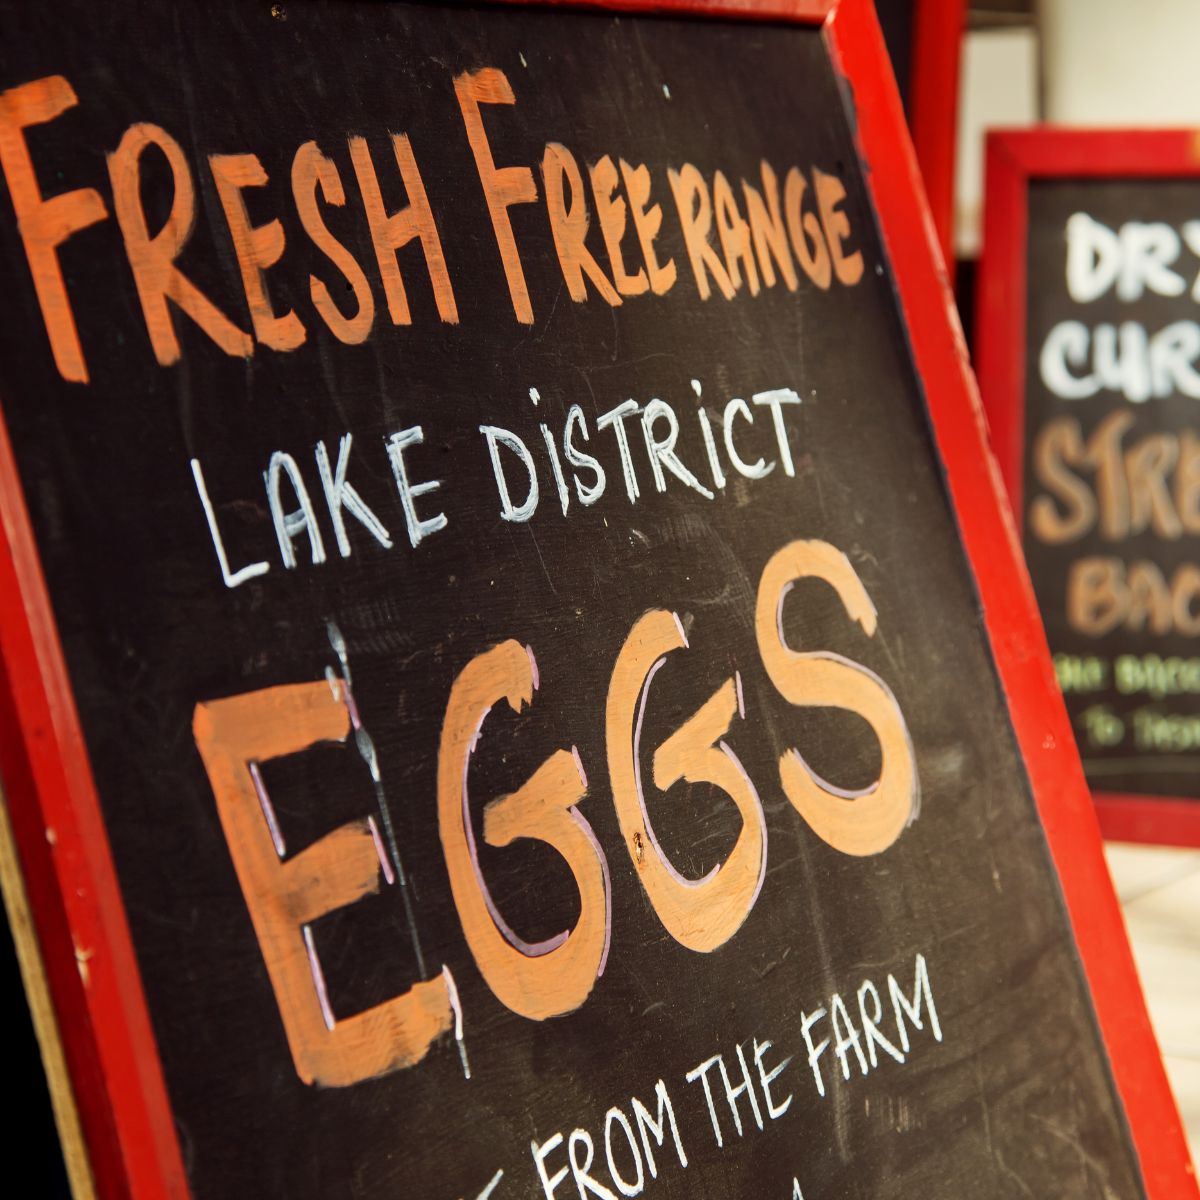 A sign for fresh eggs.